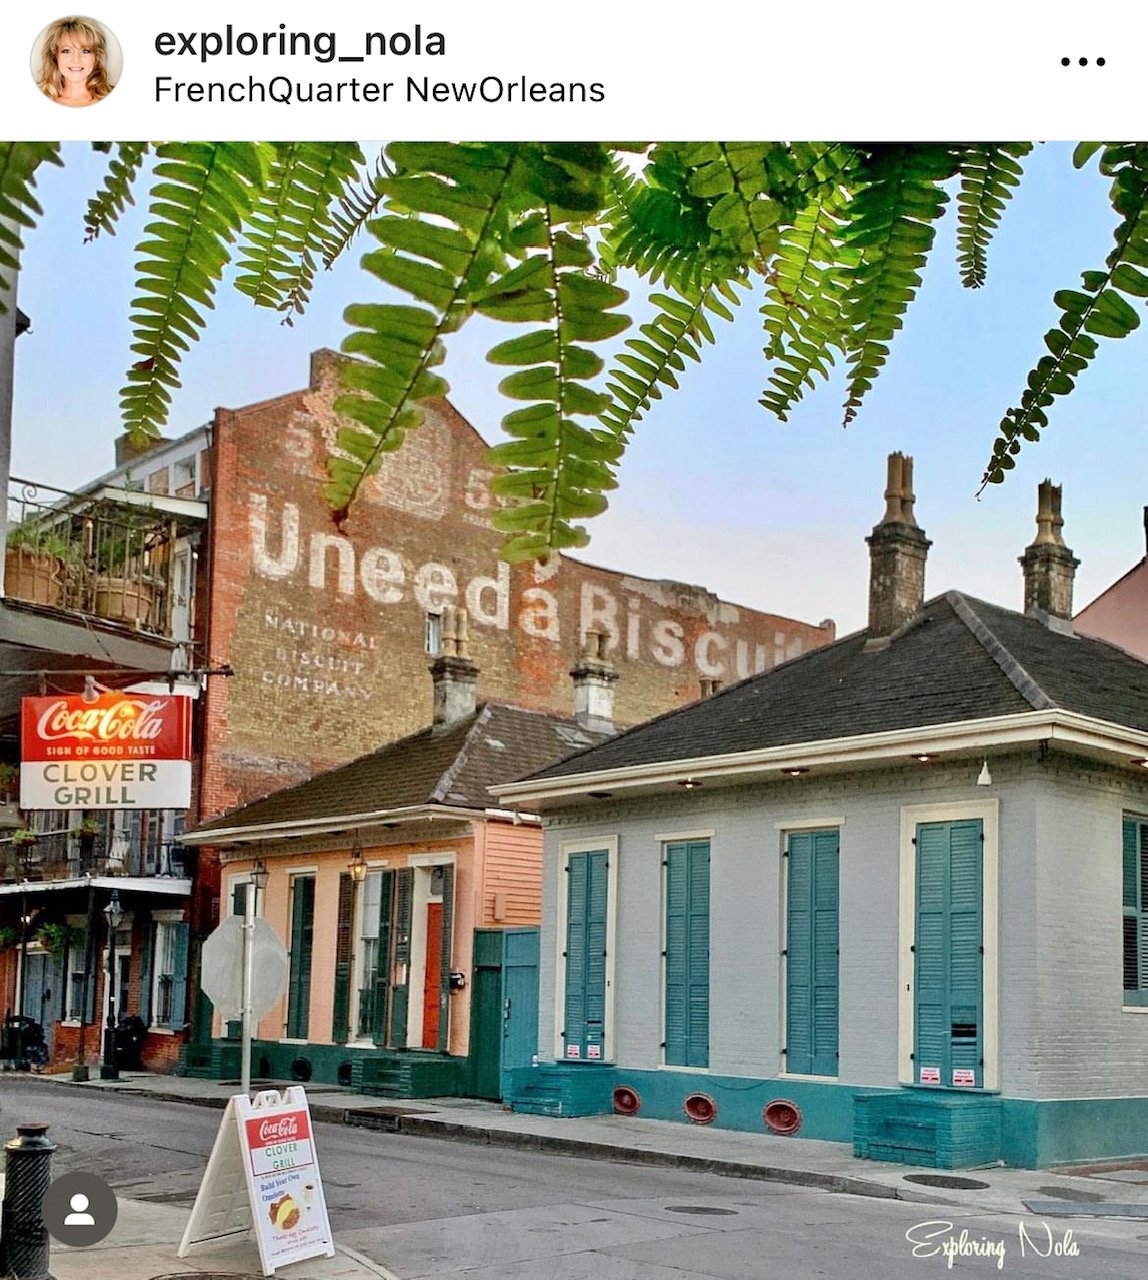 “Ghost Sign” Uneed a biscuit  French Quarter Mansion 